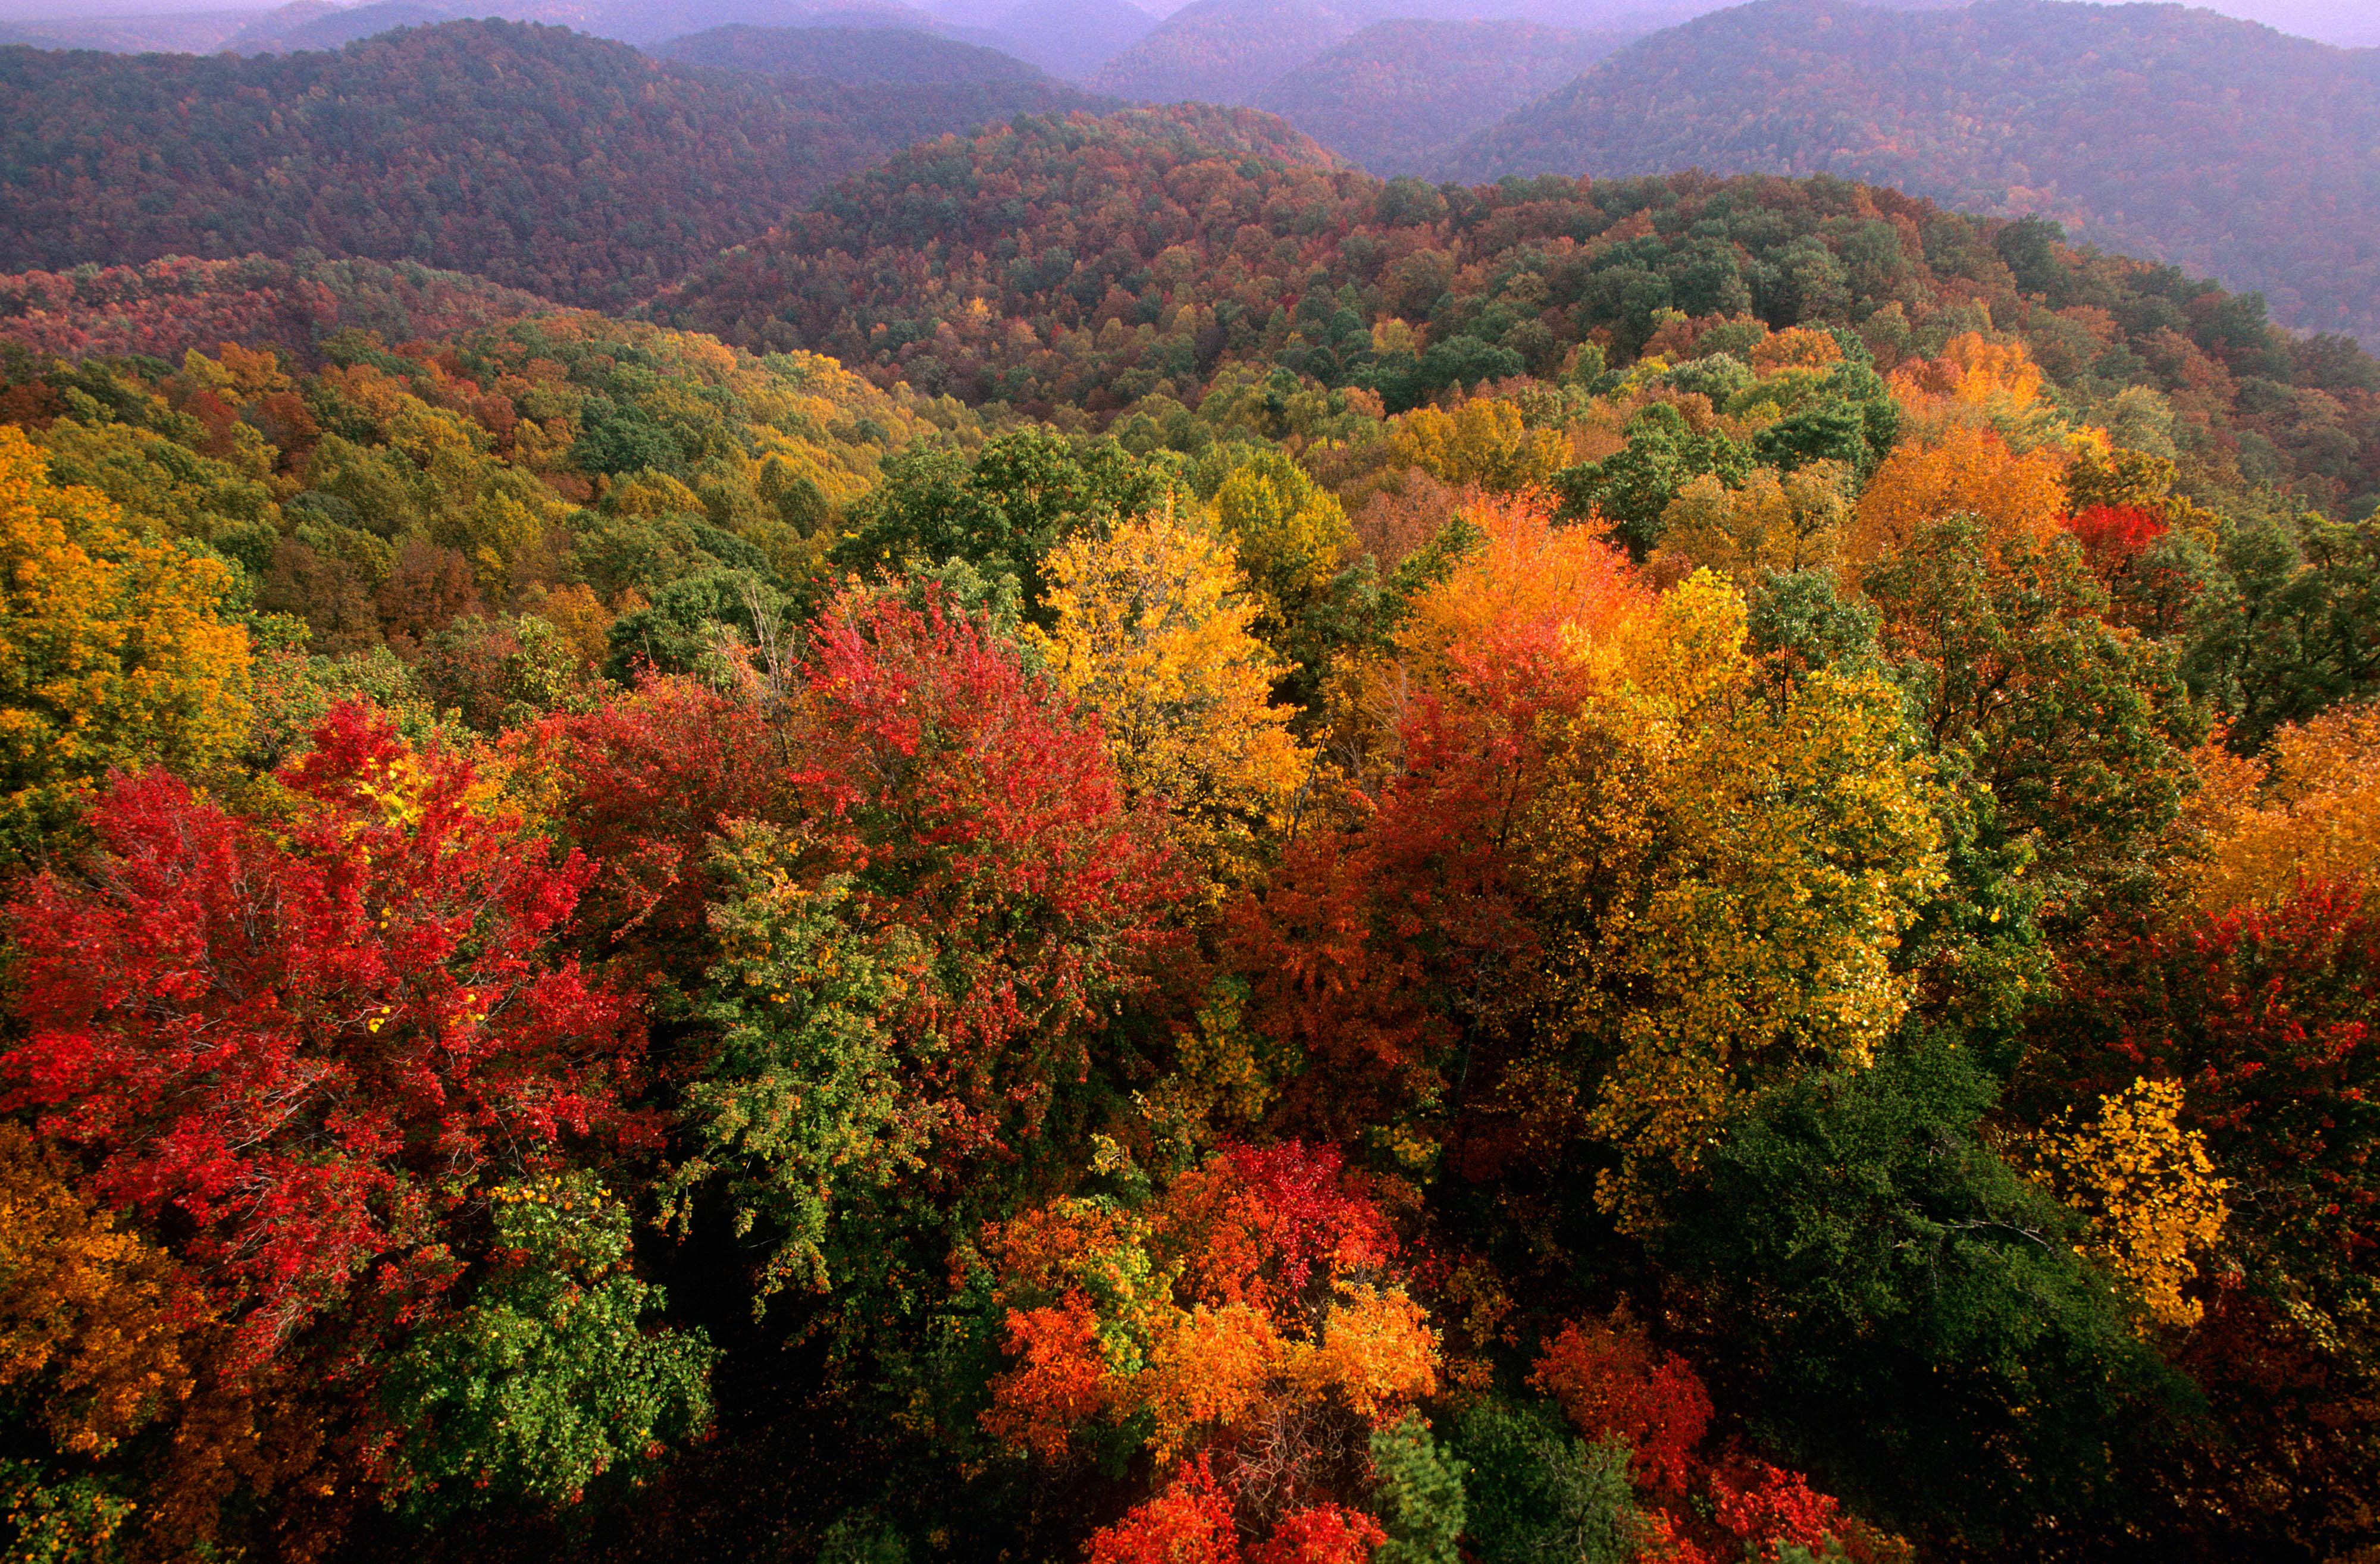 Fall foliage highlights a forested landscape.